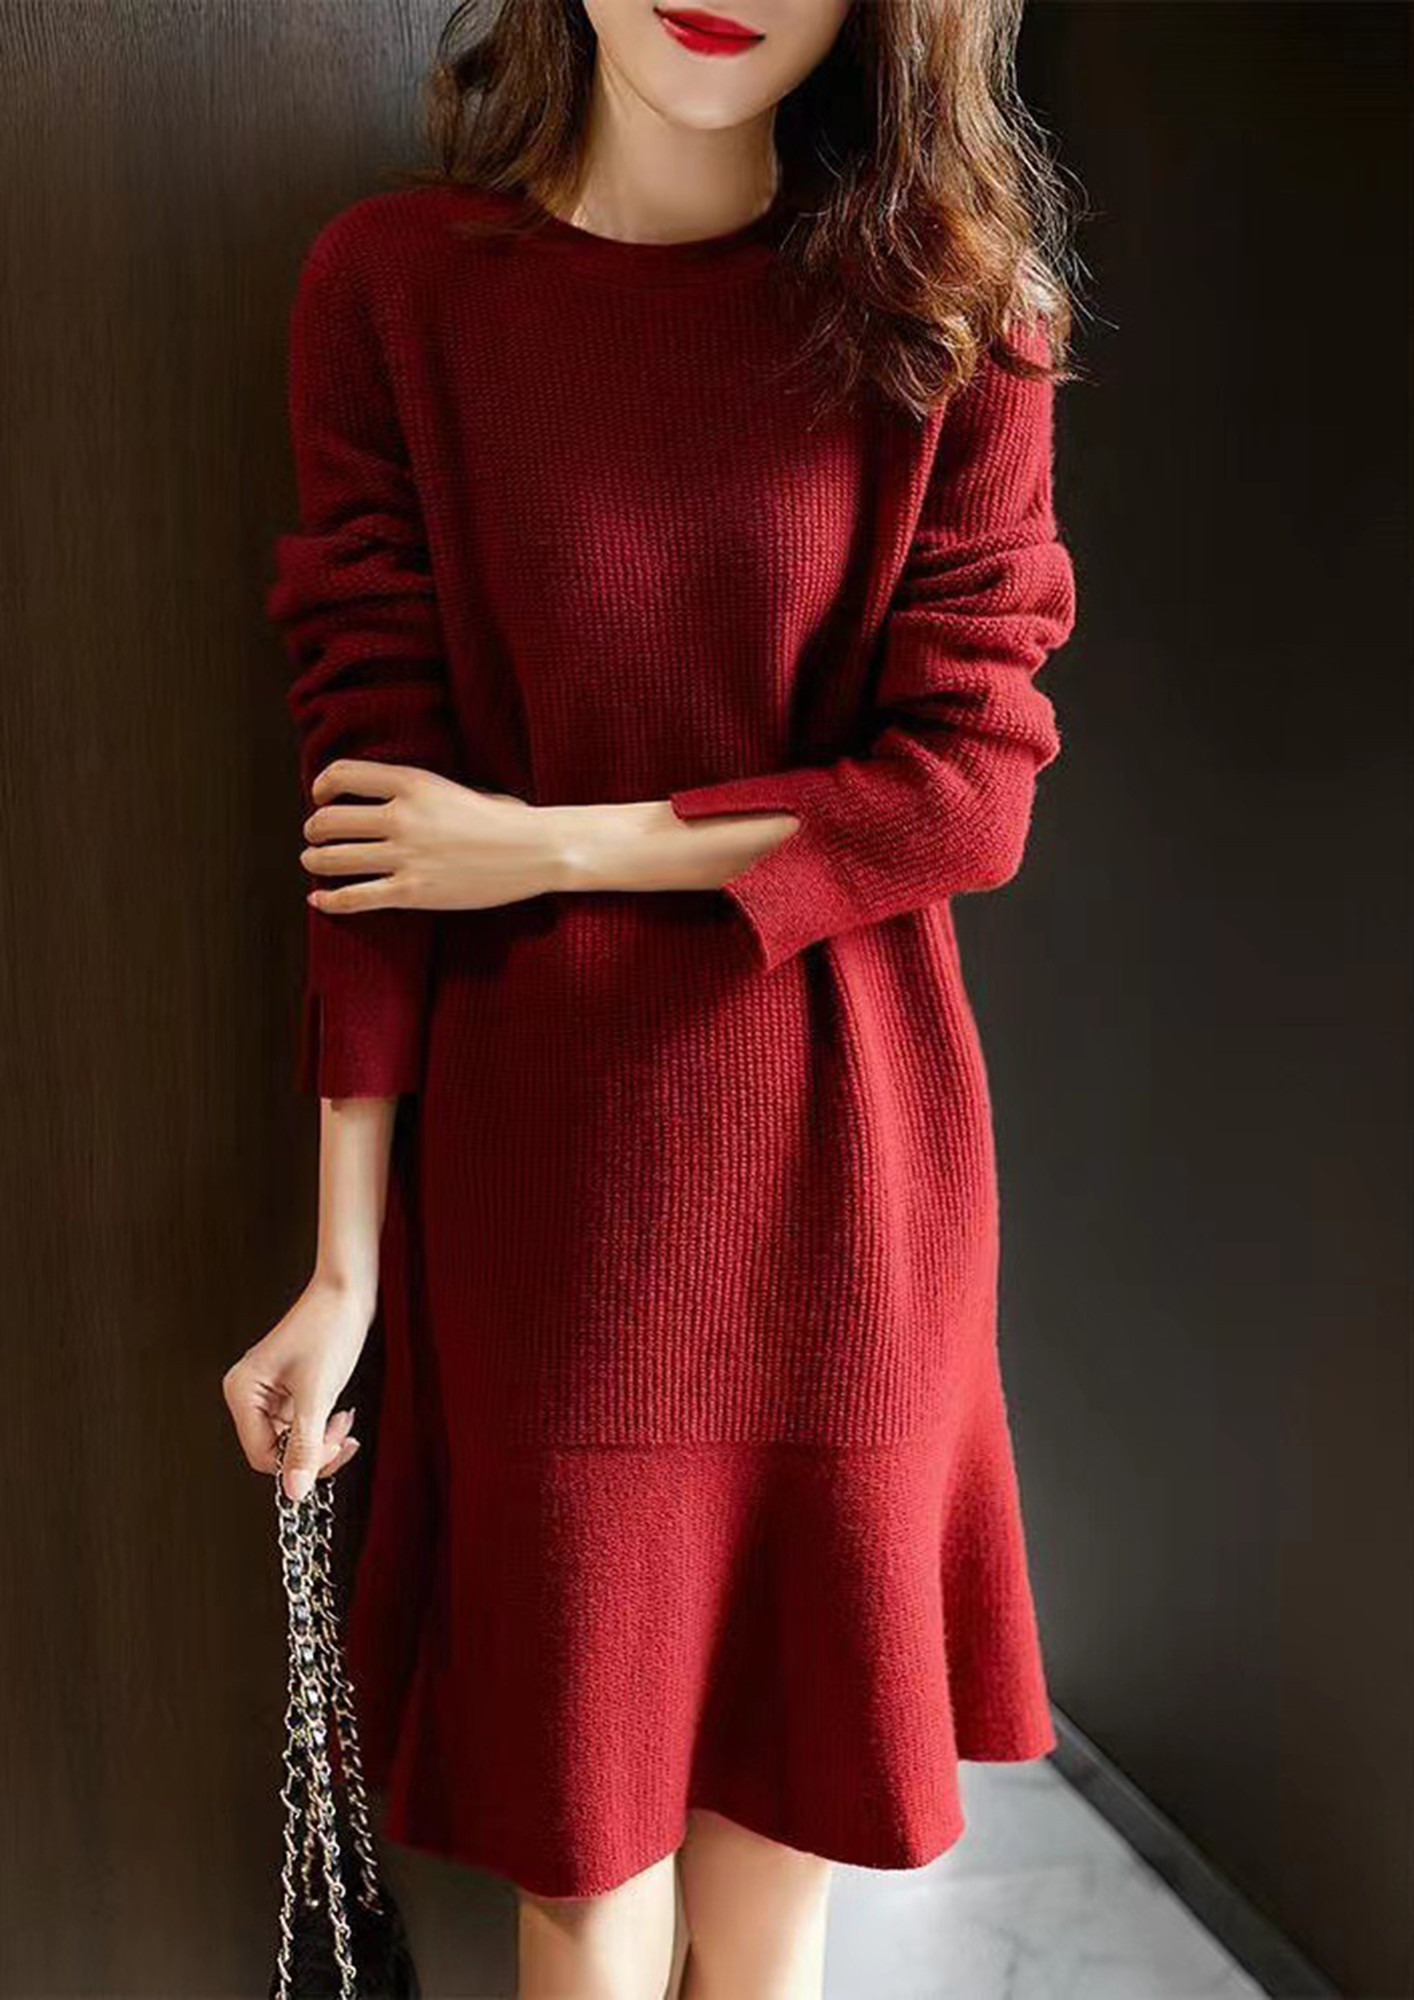 Sweater Dress - Buy Sweater Dresses Online in India